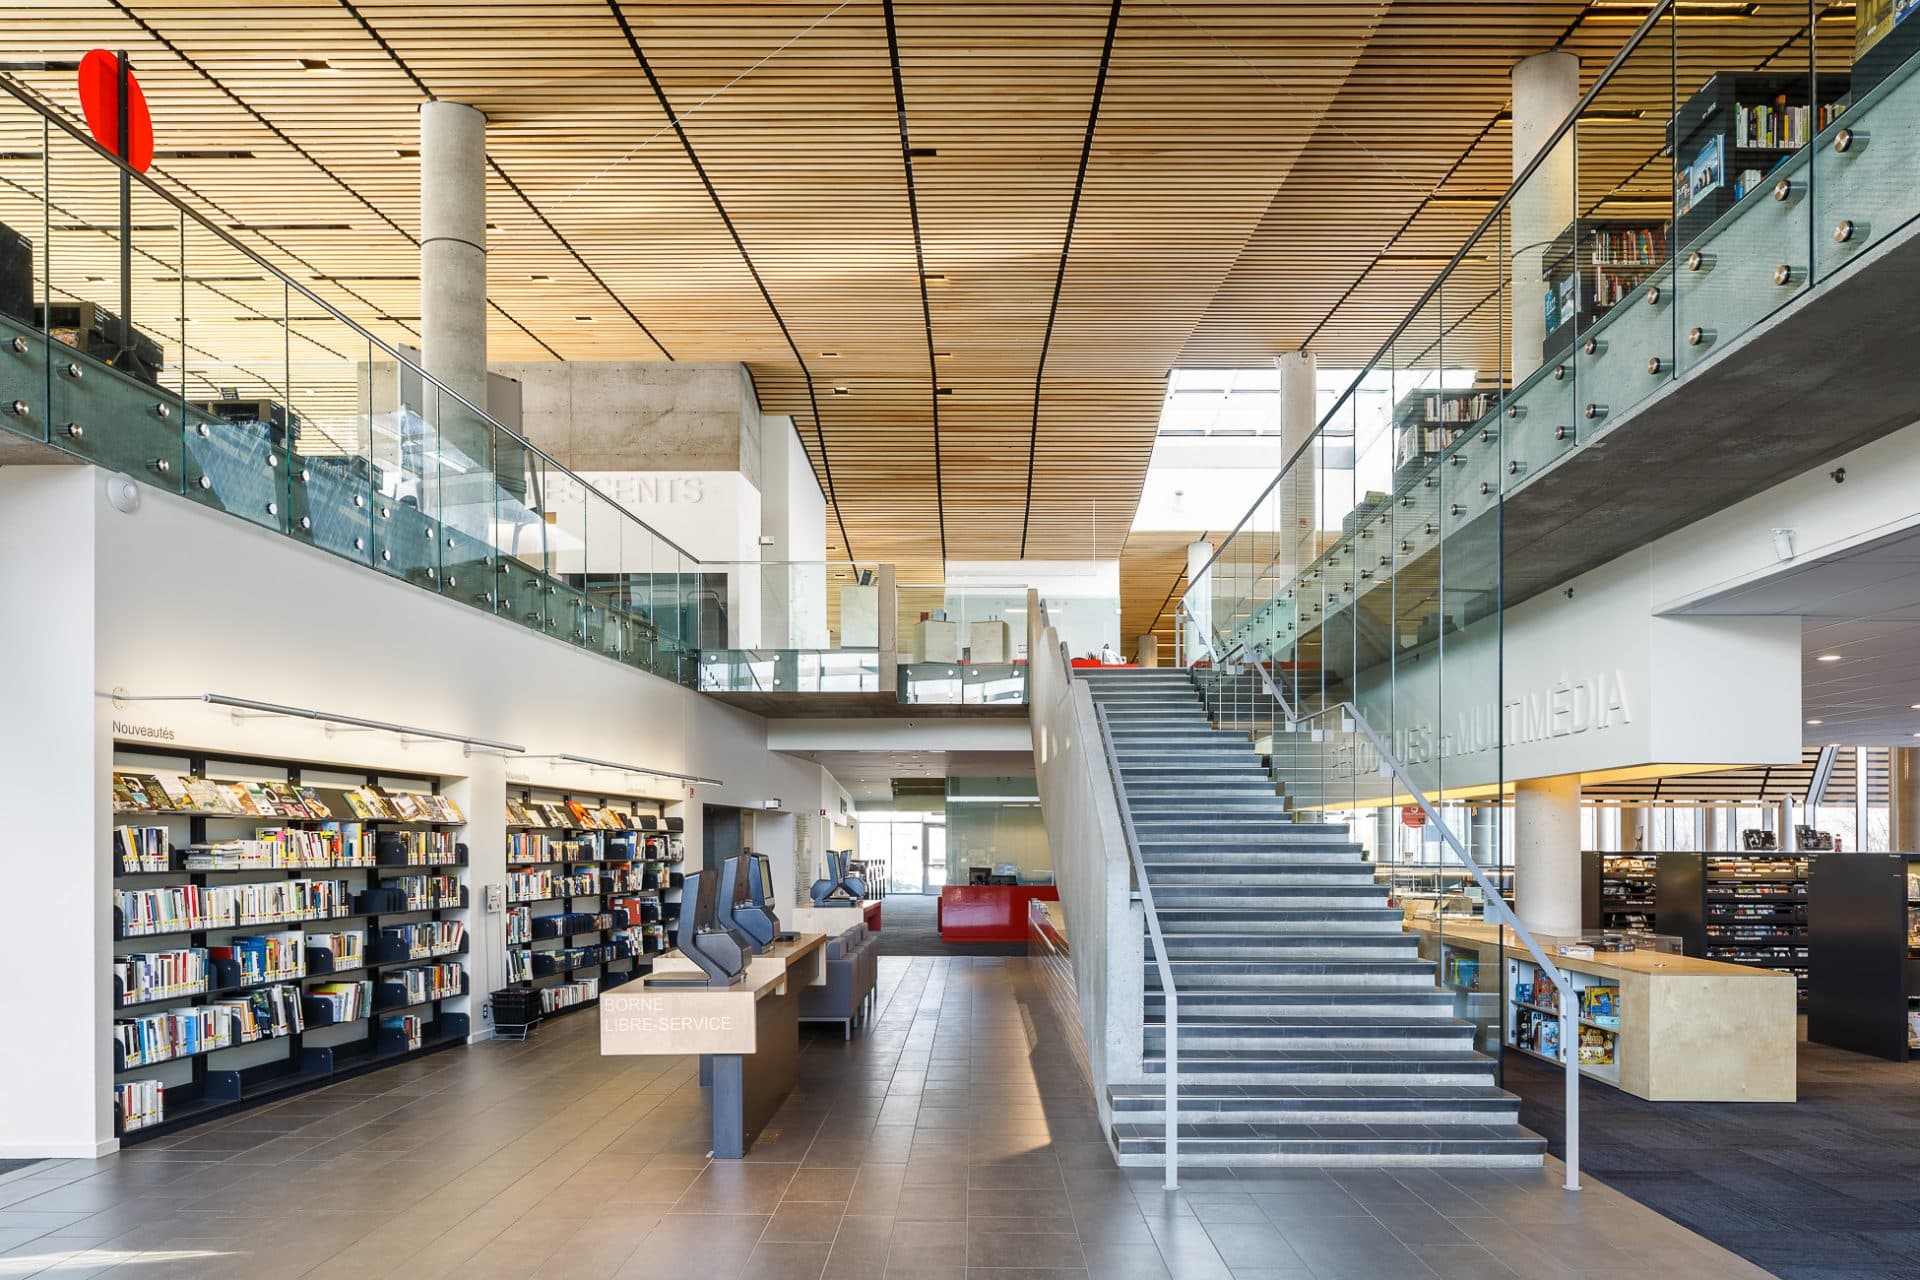 Lemay-Architecture-Bibliotheque-DuBoise-Montreal-Library-Design-grandplan-DavidBoyer-learning-environments-biophilic-design